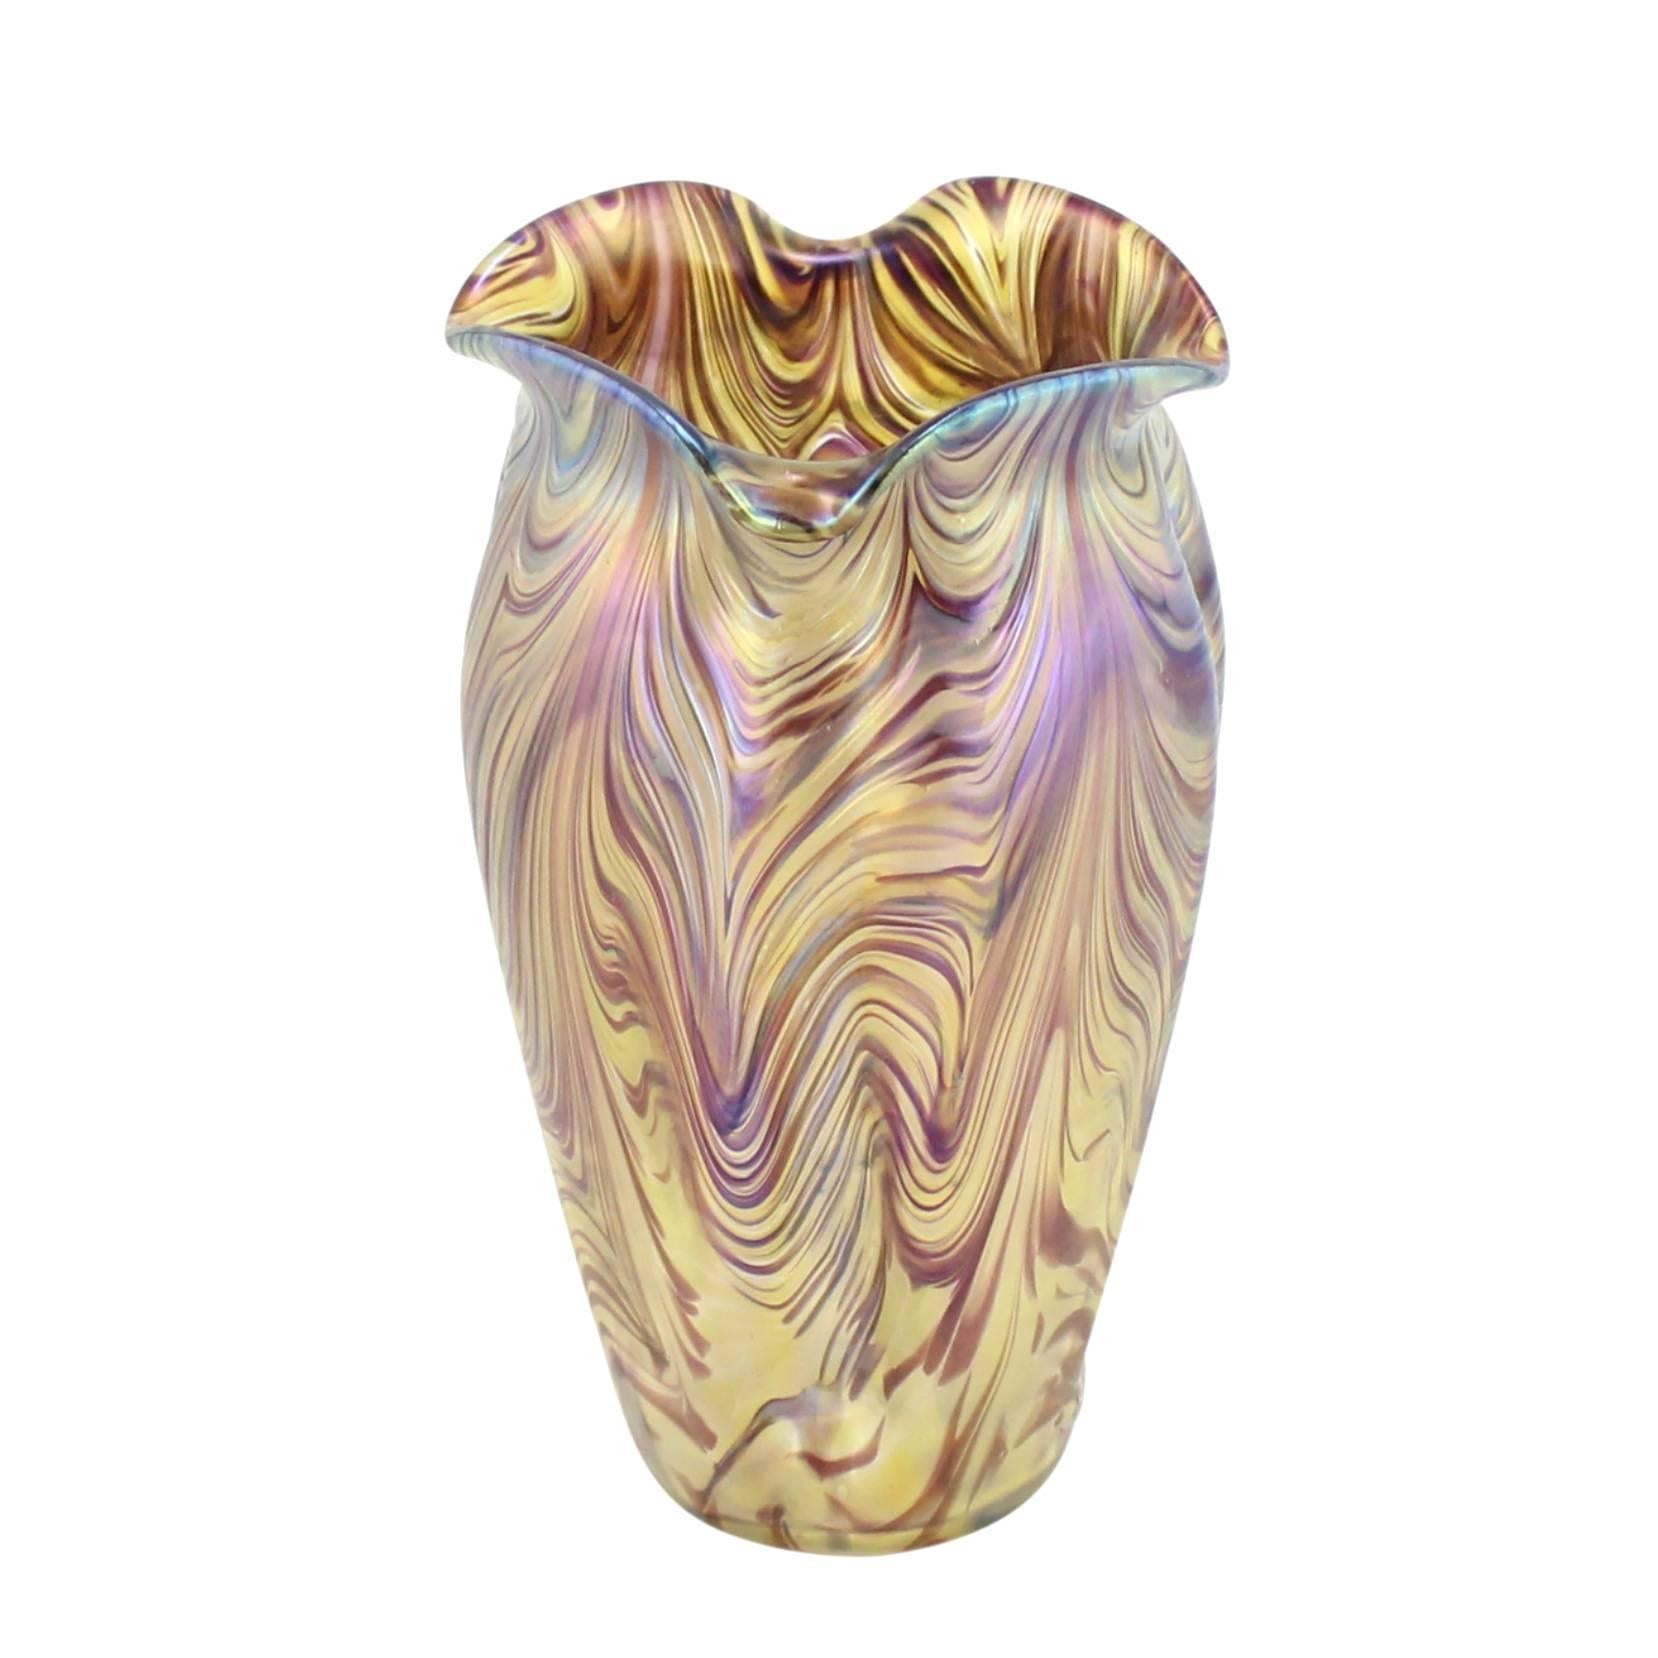 An Art Nouveau handblown vase in the swirl decor featuring churning stripes of gold and purple in varying thicknesses applied over a clear glass base. The bottom features a ground pontil mark.